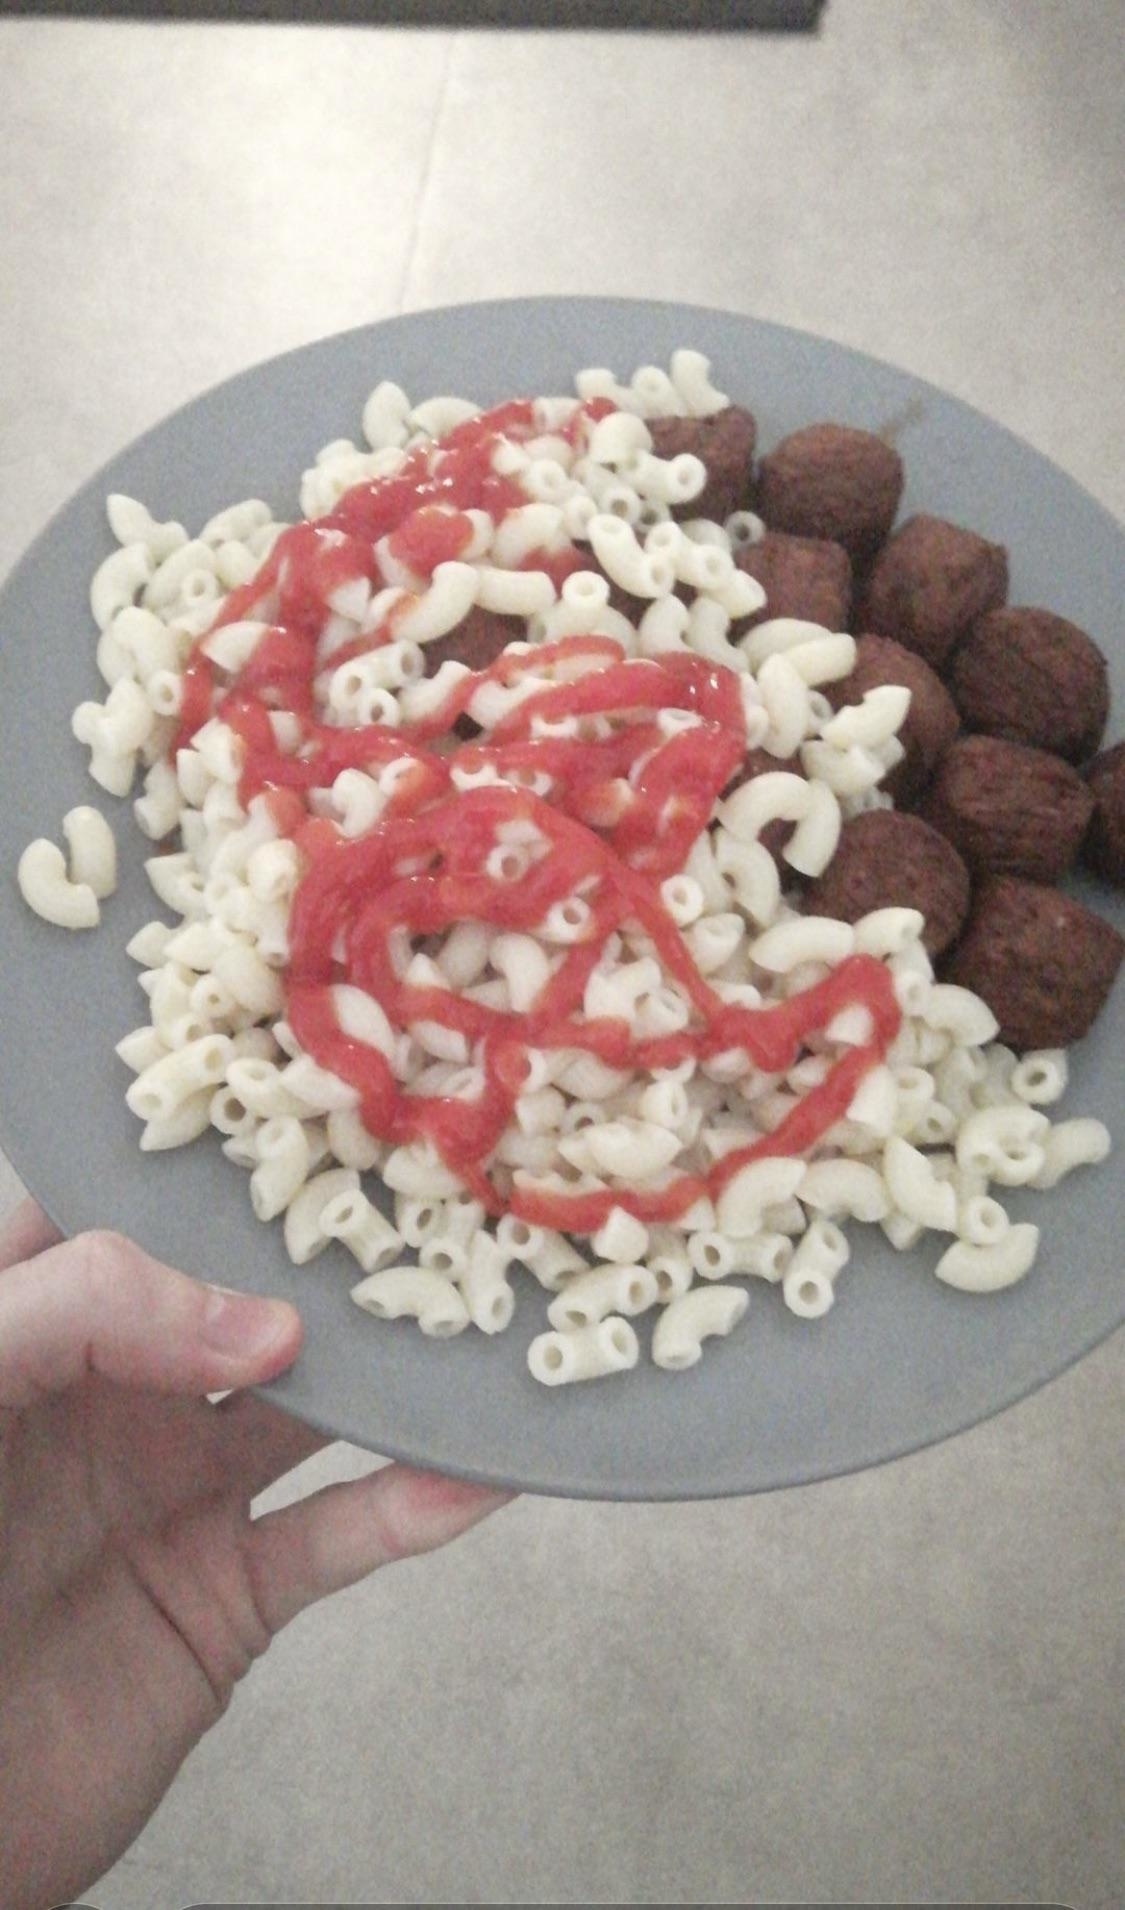 plain macaroni noodles with fish balls next to it ketchup drizzled on top